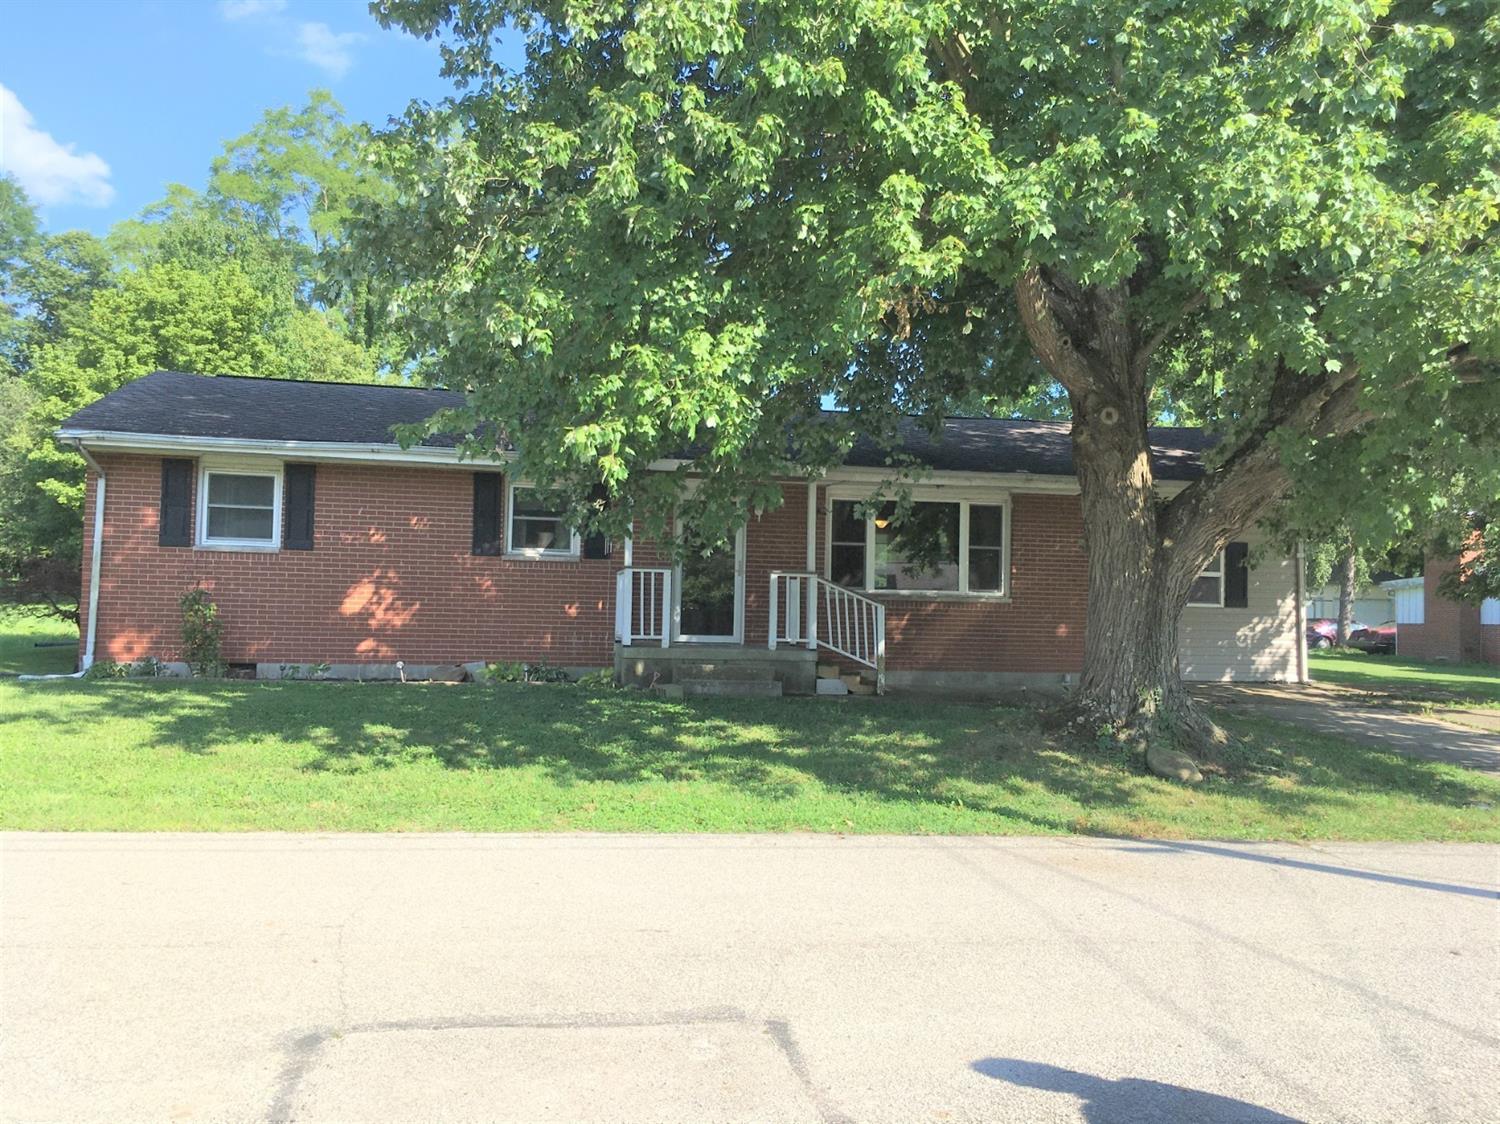 108 Sugartree St Clarksville Oh Mls Coldwell Banker